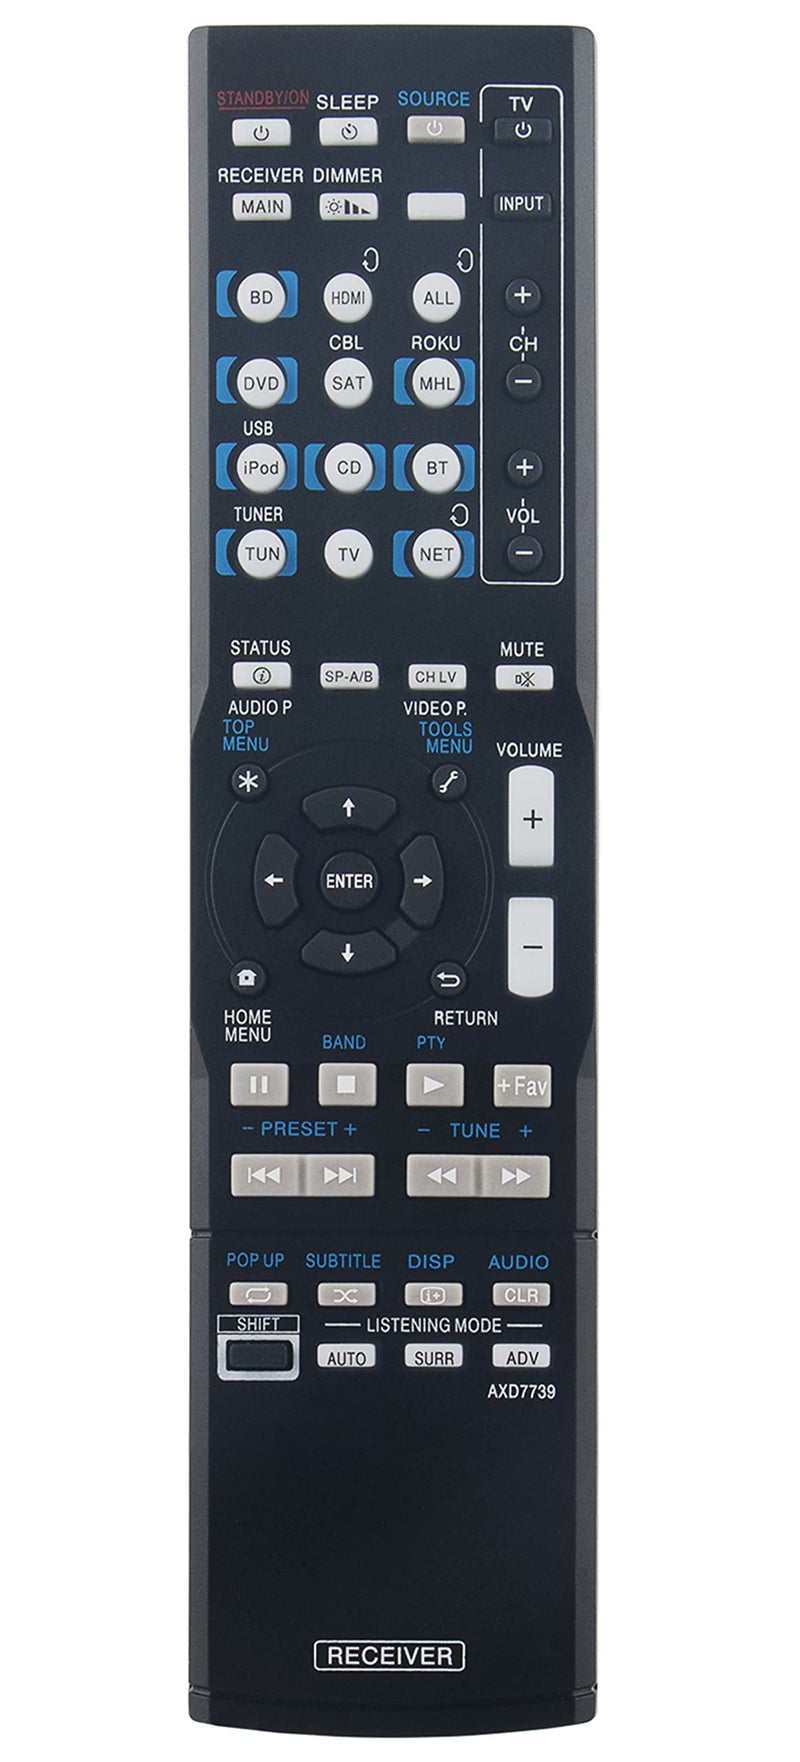  [AUSTRALIA] - AXD7739 Replaced Remote fit for Pioneer Elite AV Receiver VSX-830 VSX-95 VSX-1130-K VSX-830-K VSX-45 VSX-45 VSX-45 VSX-90